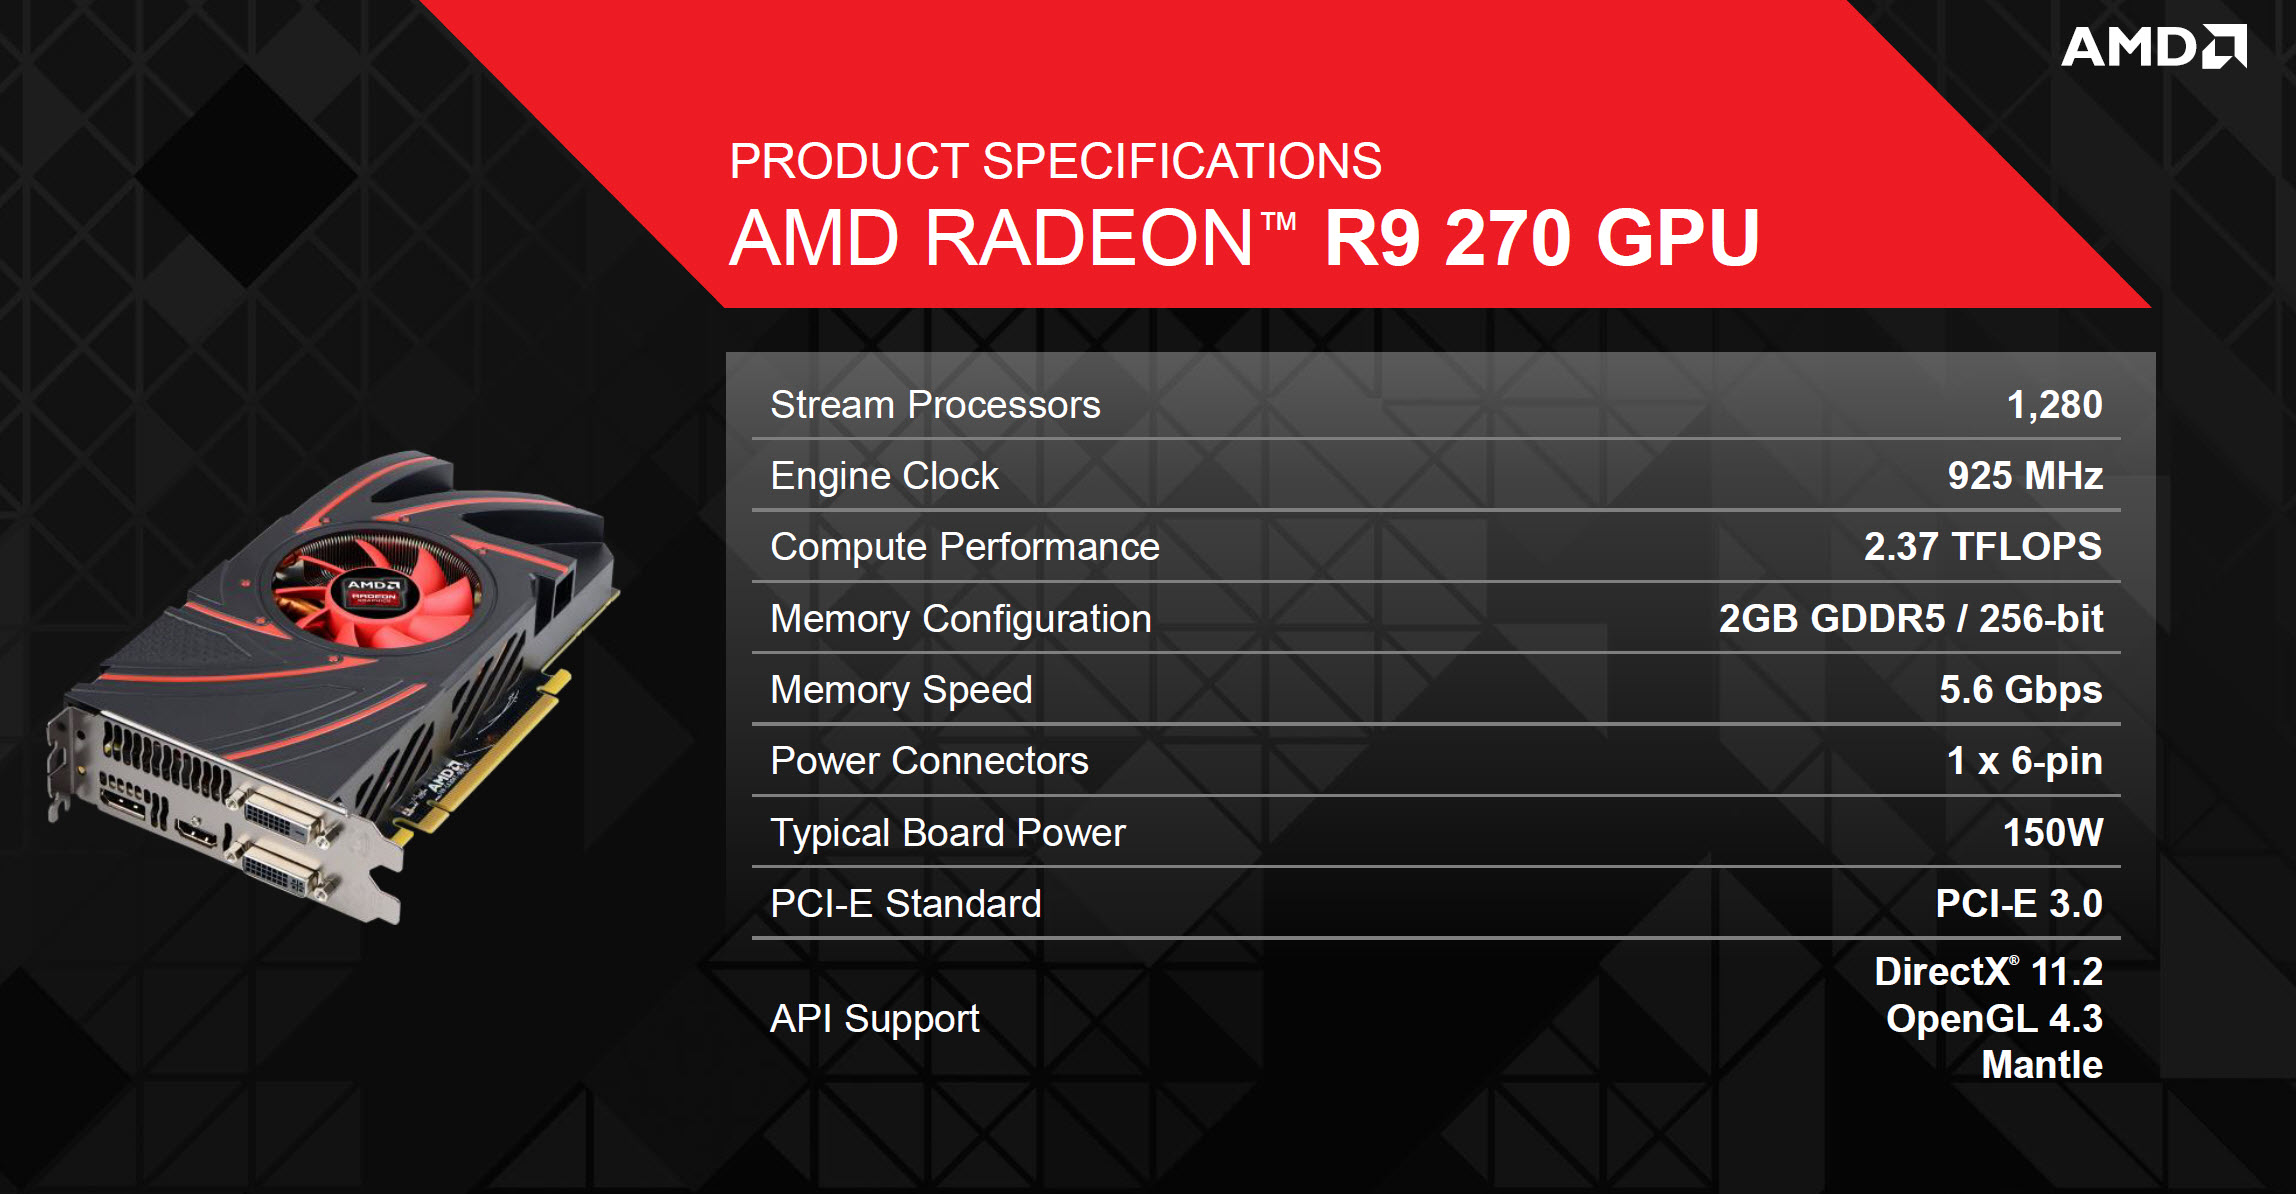 AMD launches Radeon R9 270 for $179 